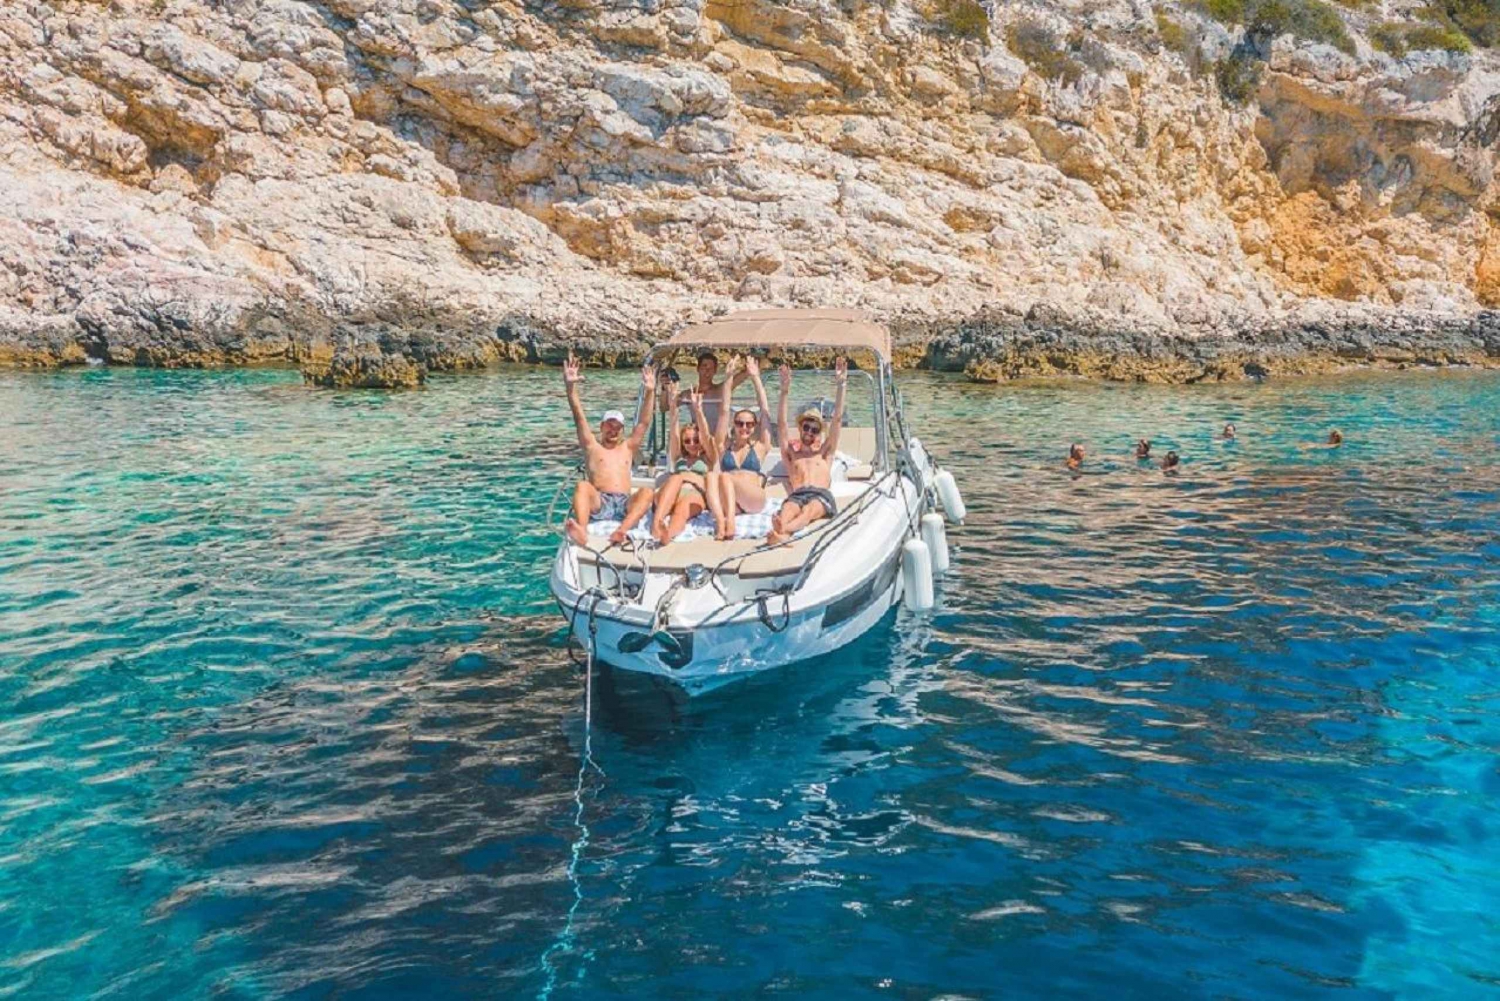 Split and Trogir: Private Hvar and Red Rocks Boat Tour